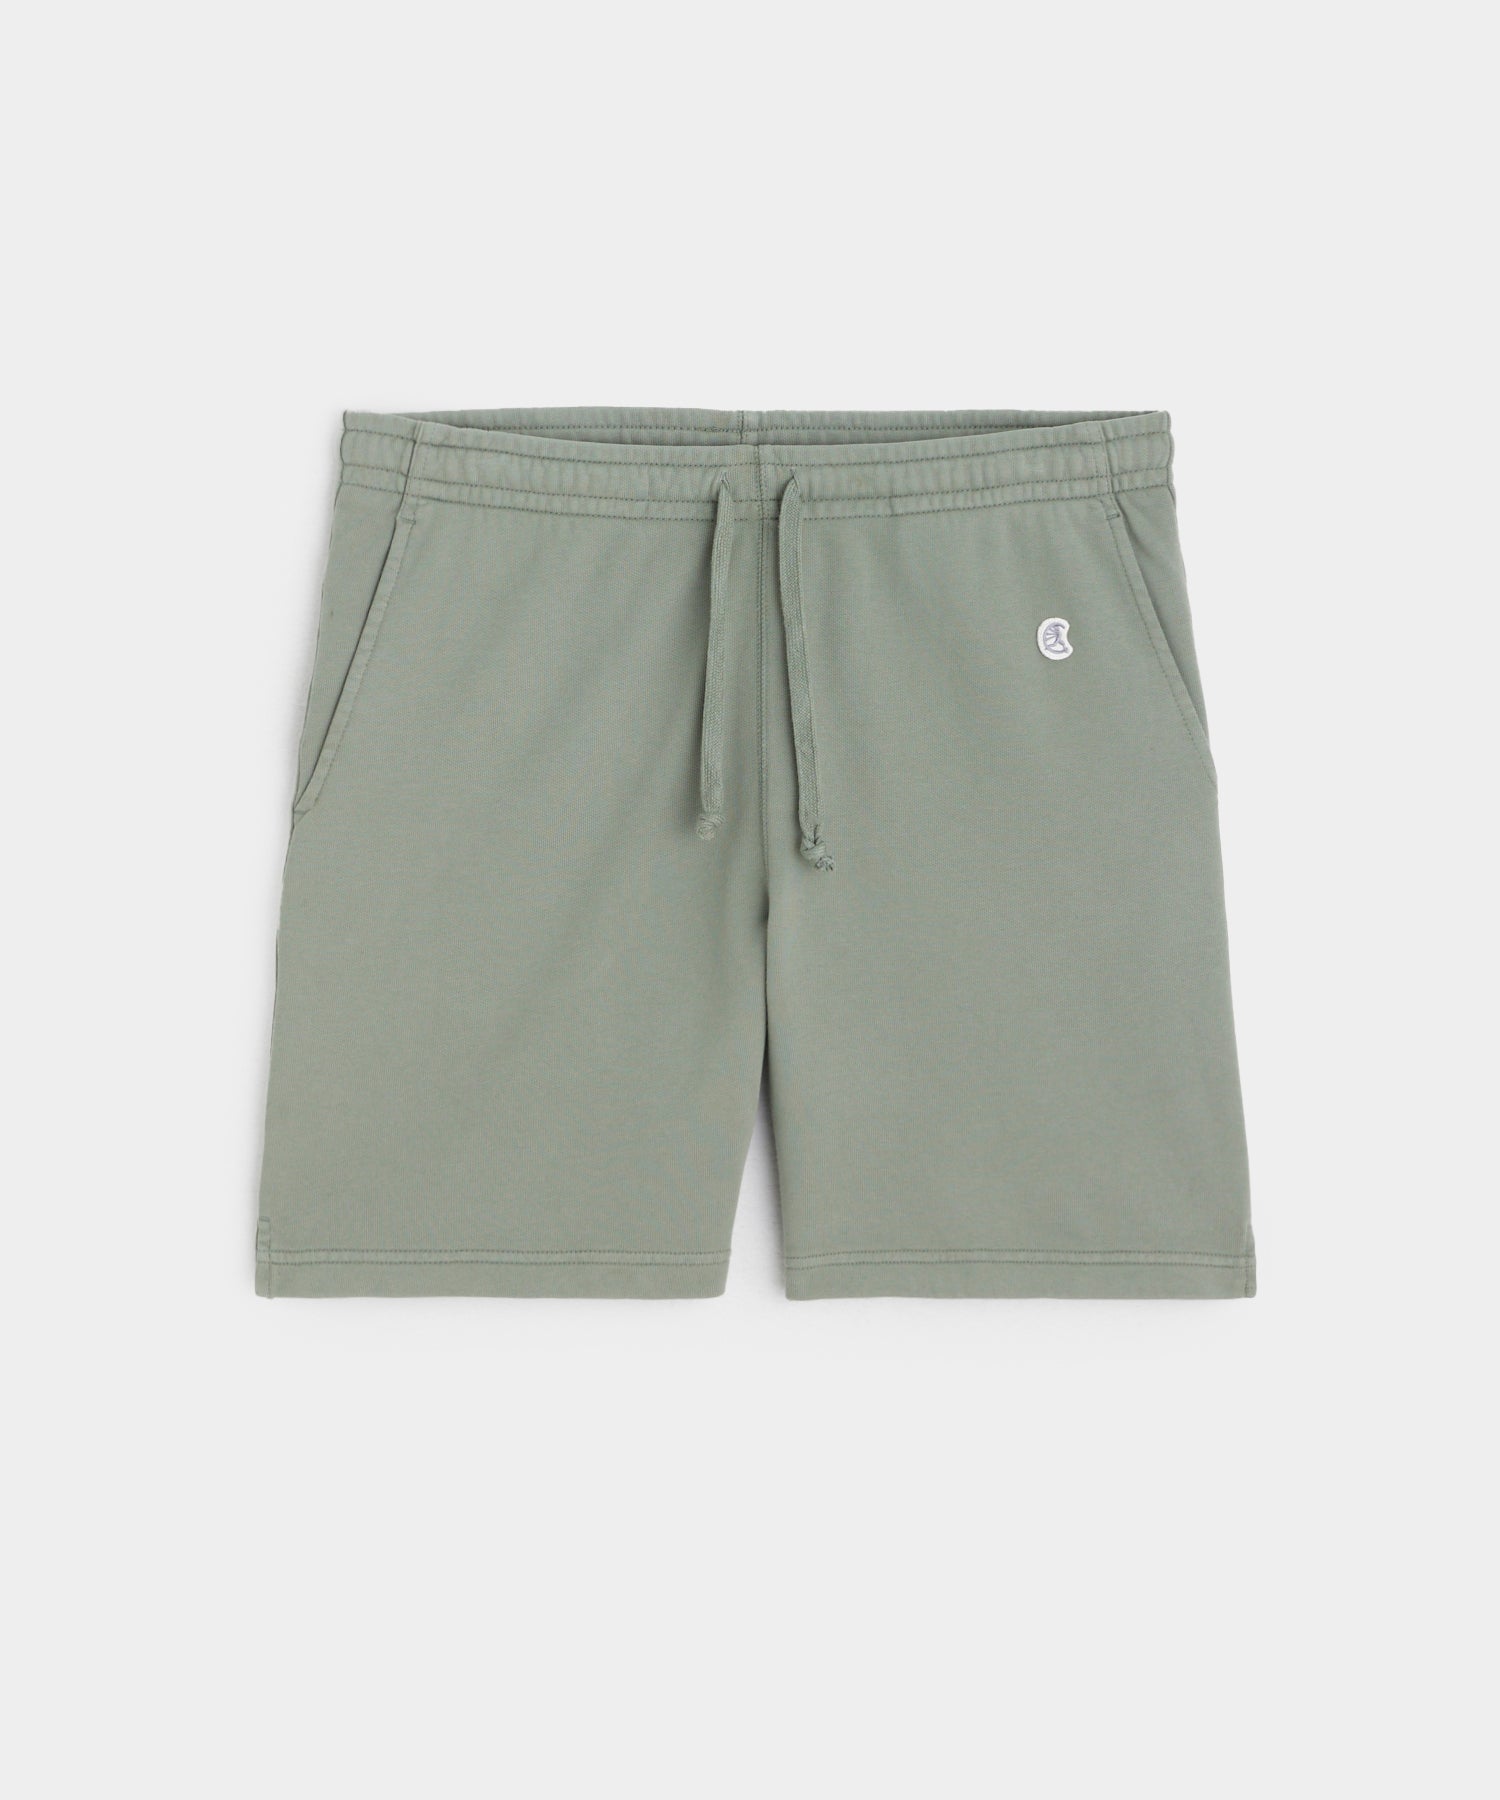 7" Midweight Warm Up Short in Green Smoke